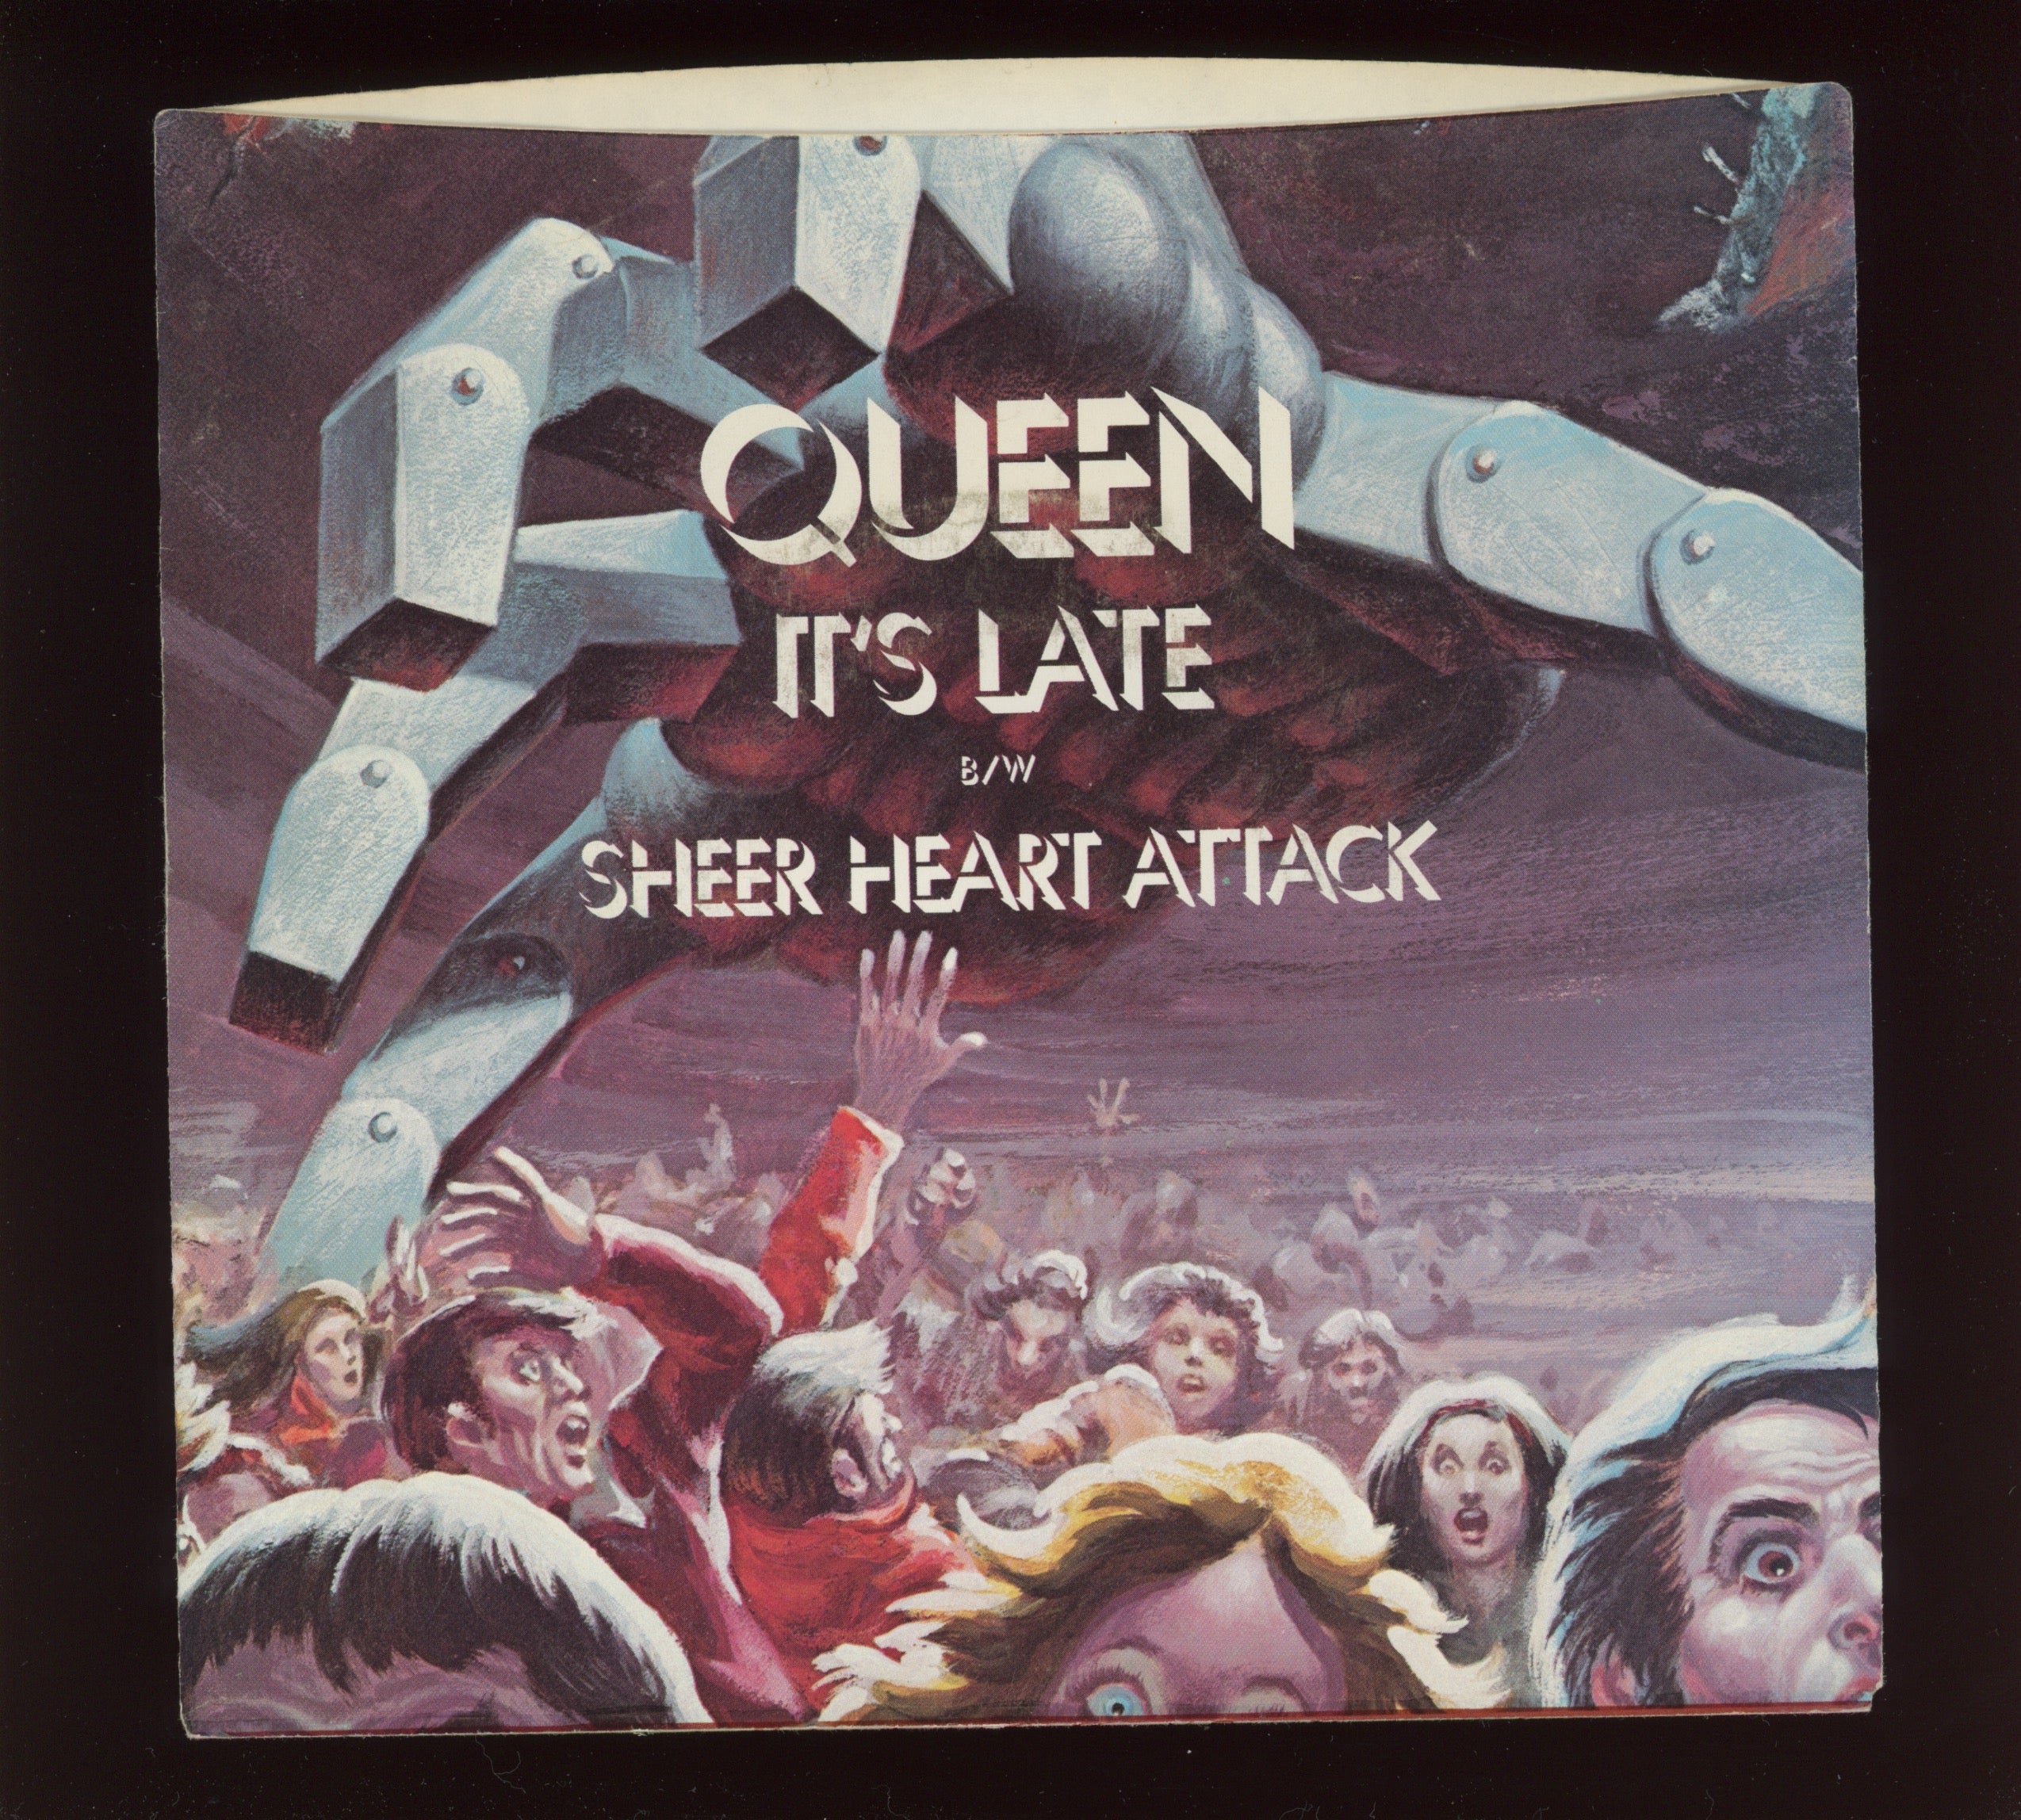 Queen - It's Late on Elektra With Picture Sleeve